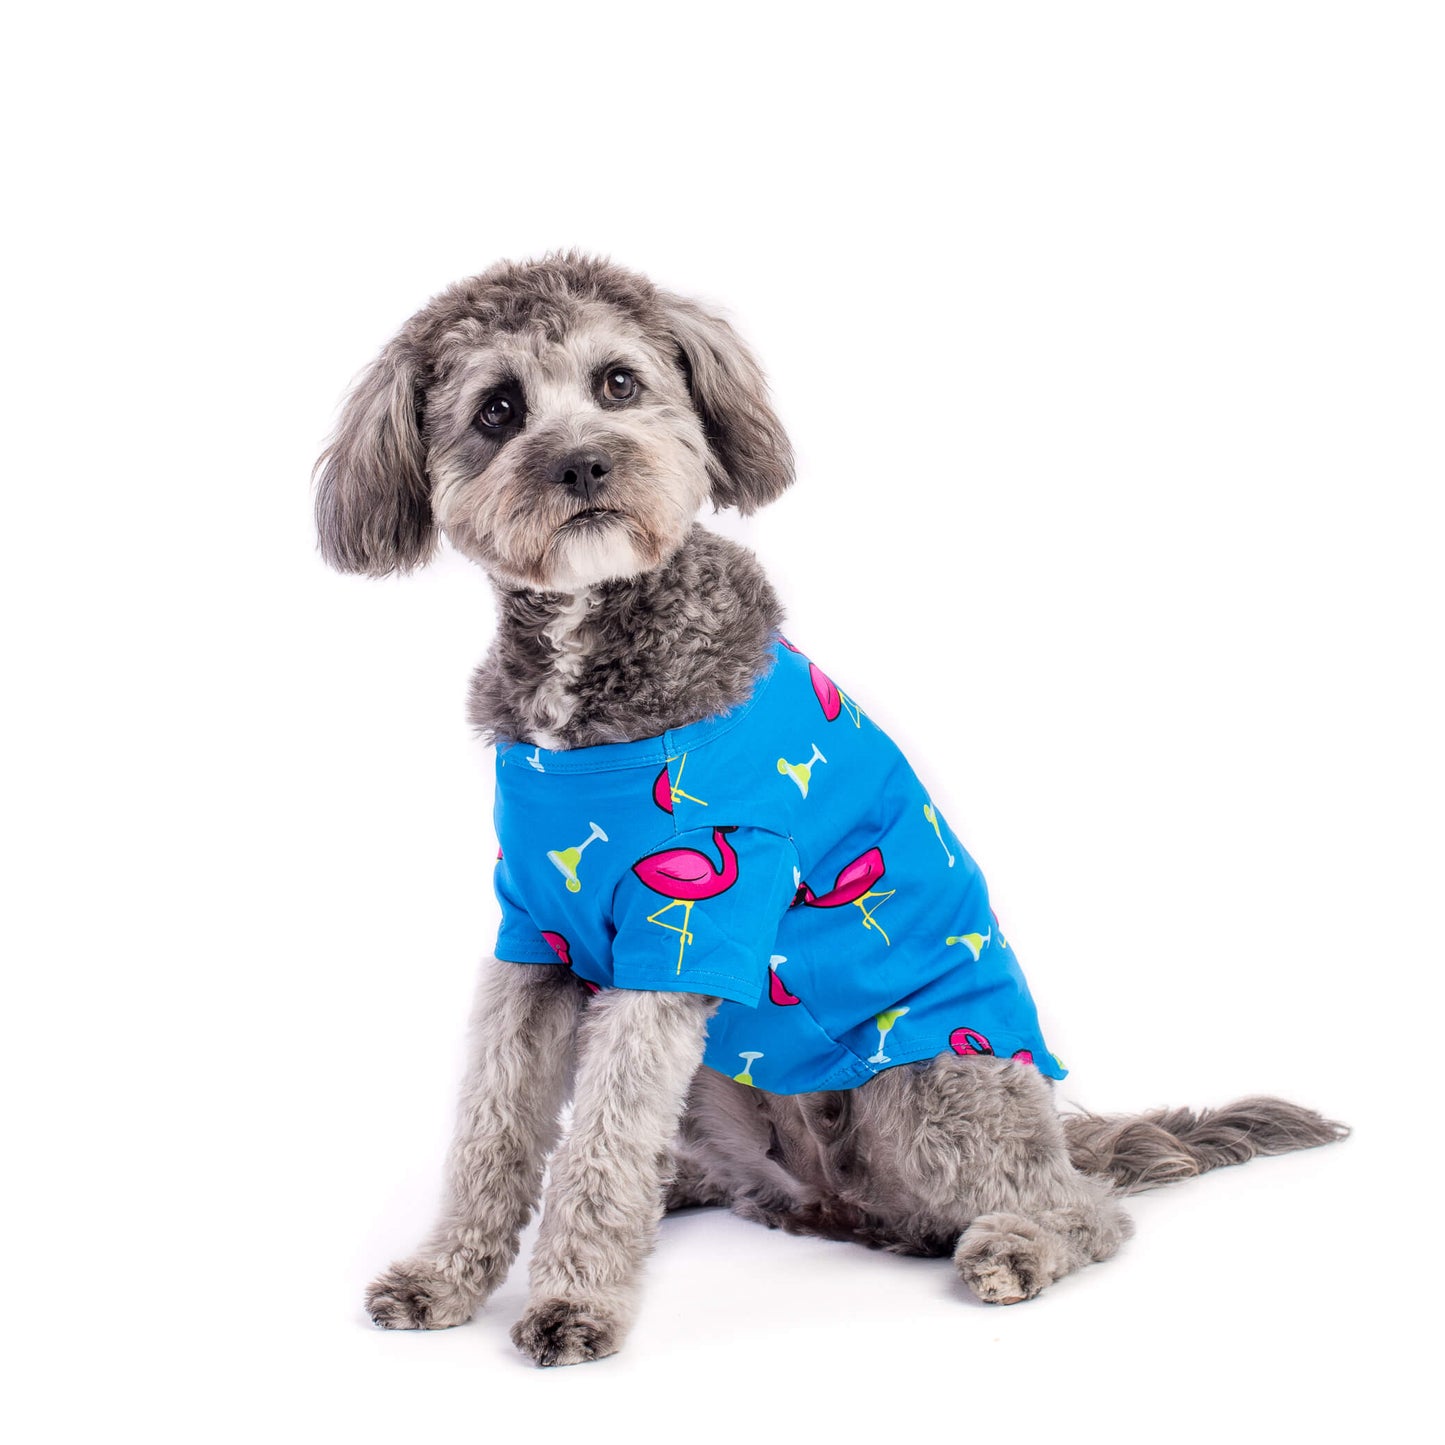 A Grey Cavoodle wearing a blue dog shirt called "Flamingo Splash" by Vibrant Hound. The shirt features pink flamingos and margaritas printed on it, creating a lively and tropical design. The dog is looking forwards, showcasing the vibrant and playful nature of the shirt.